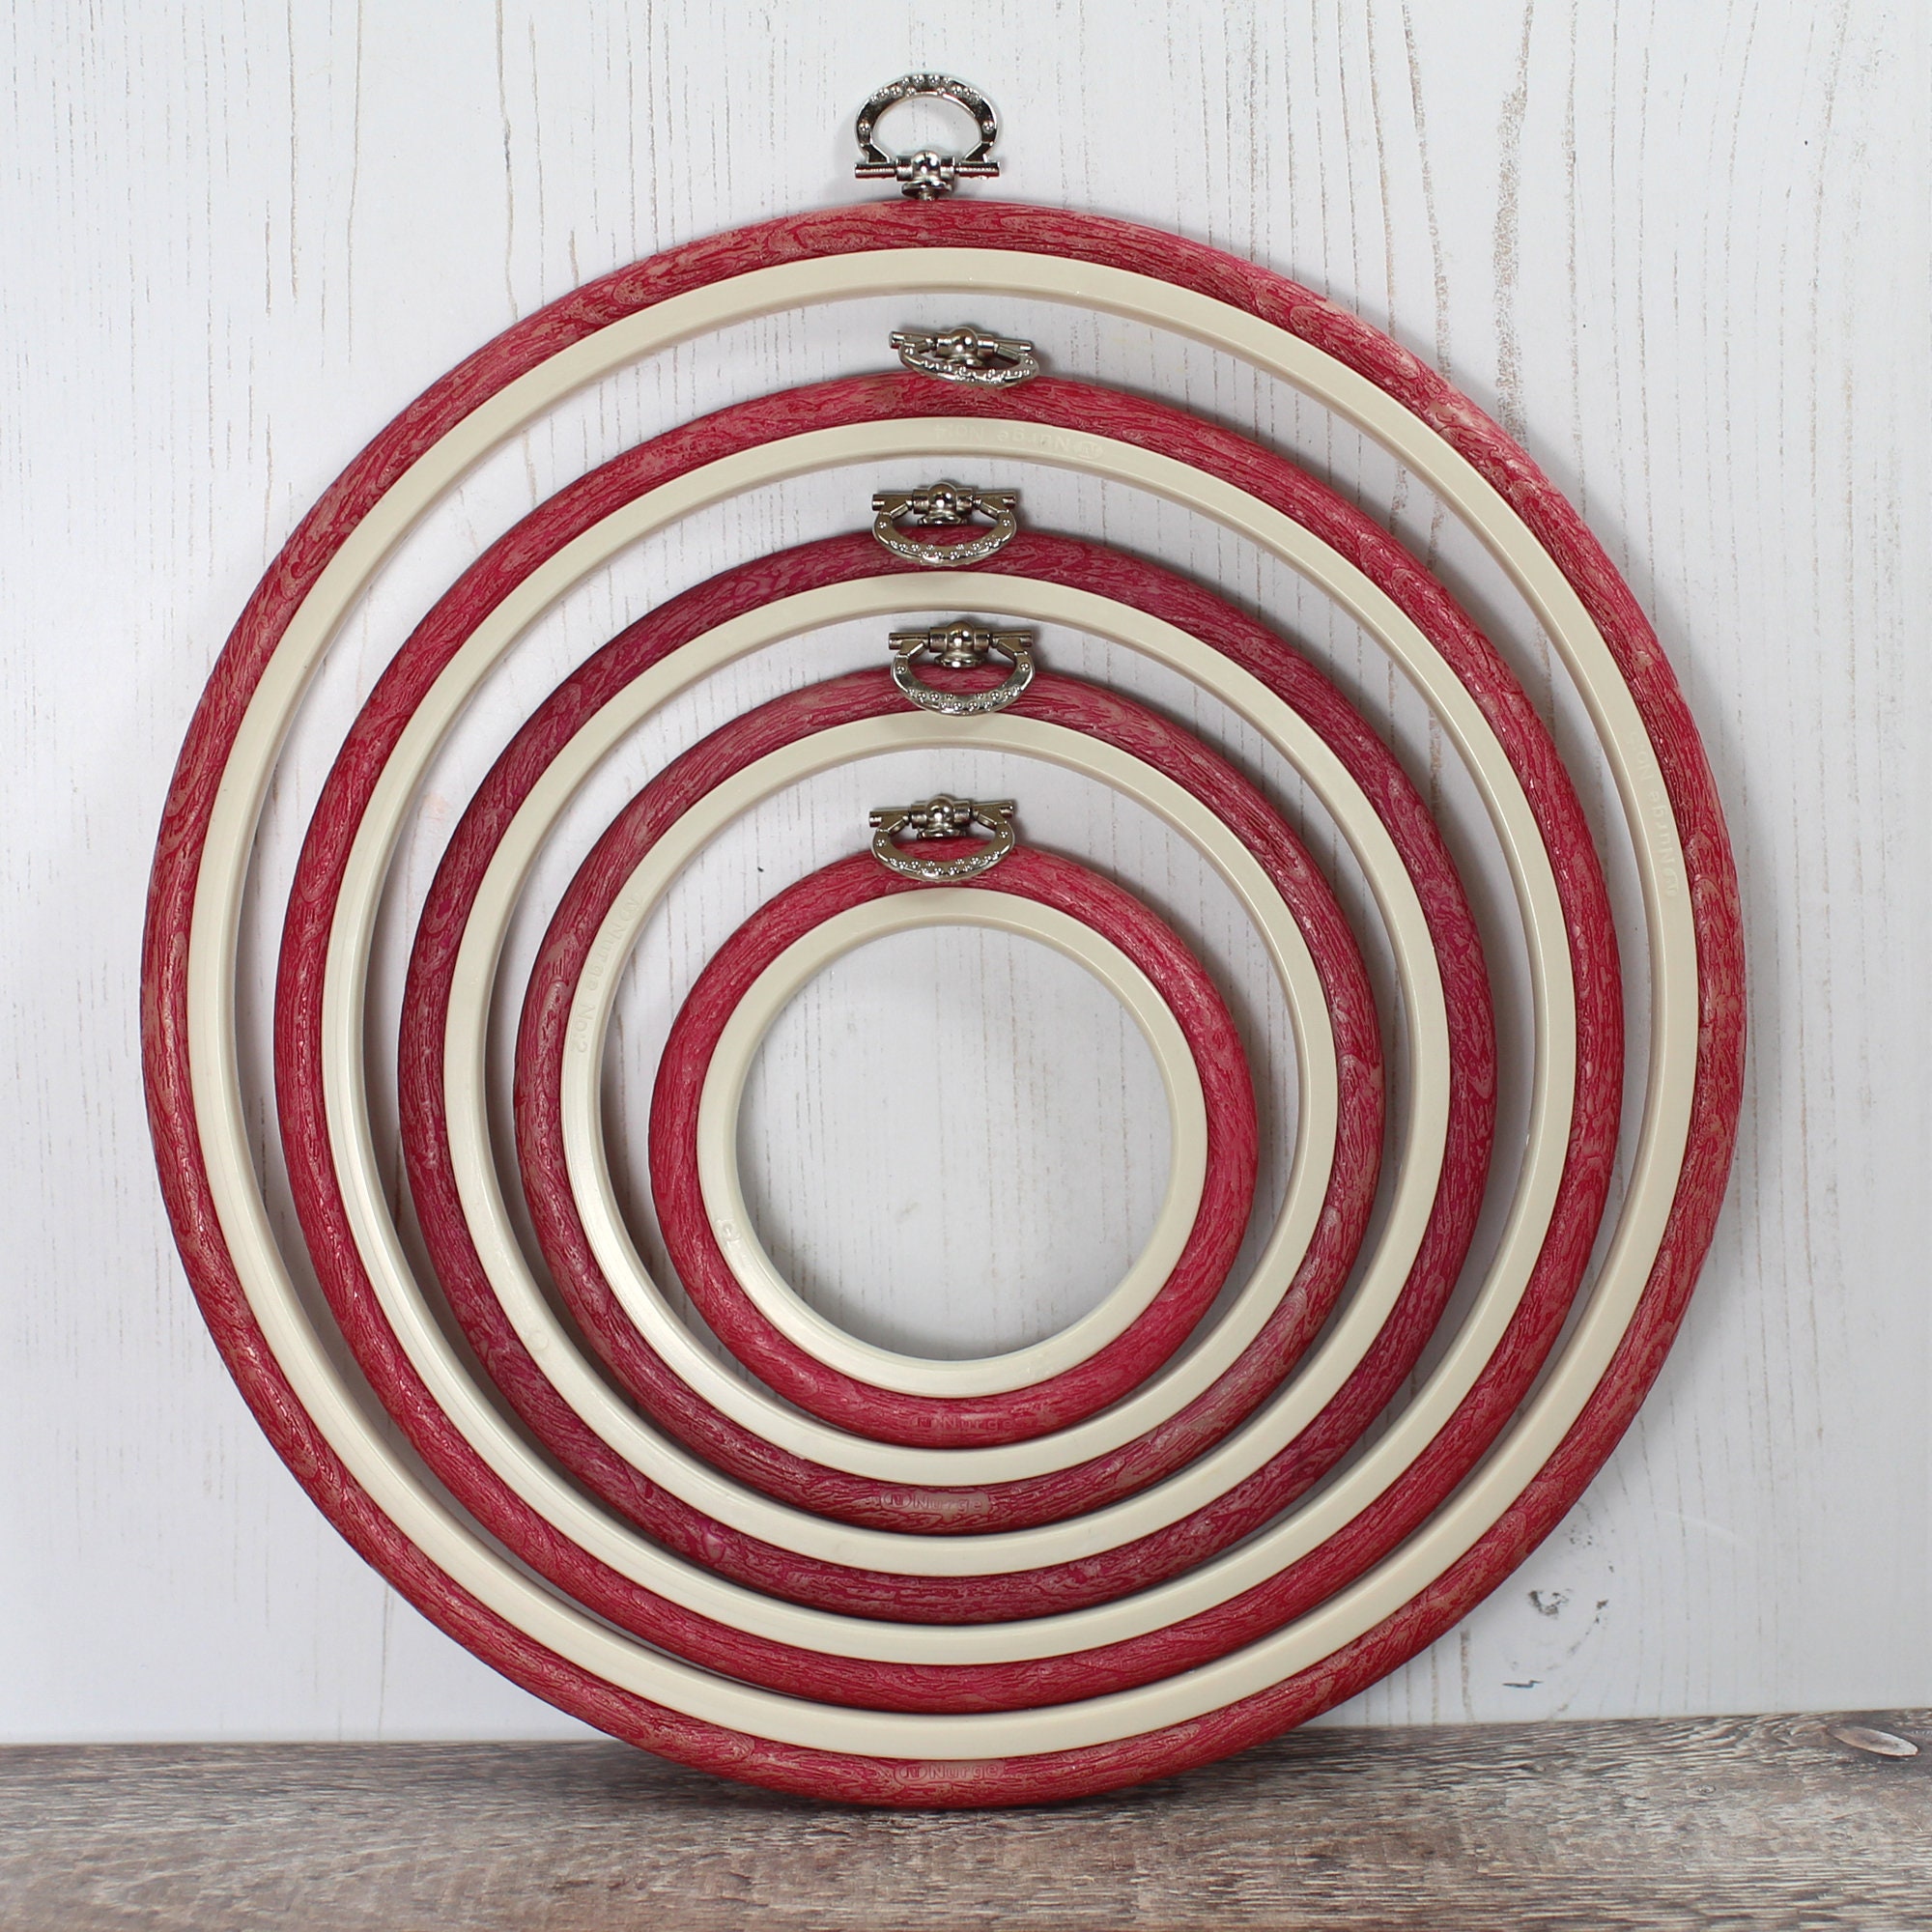 Nurge Embroidery Hoops, High Quality Wooden Frame, Embroidery Hoop Art, Embroidery  Hoop Frame, Hand Embroidered. 